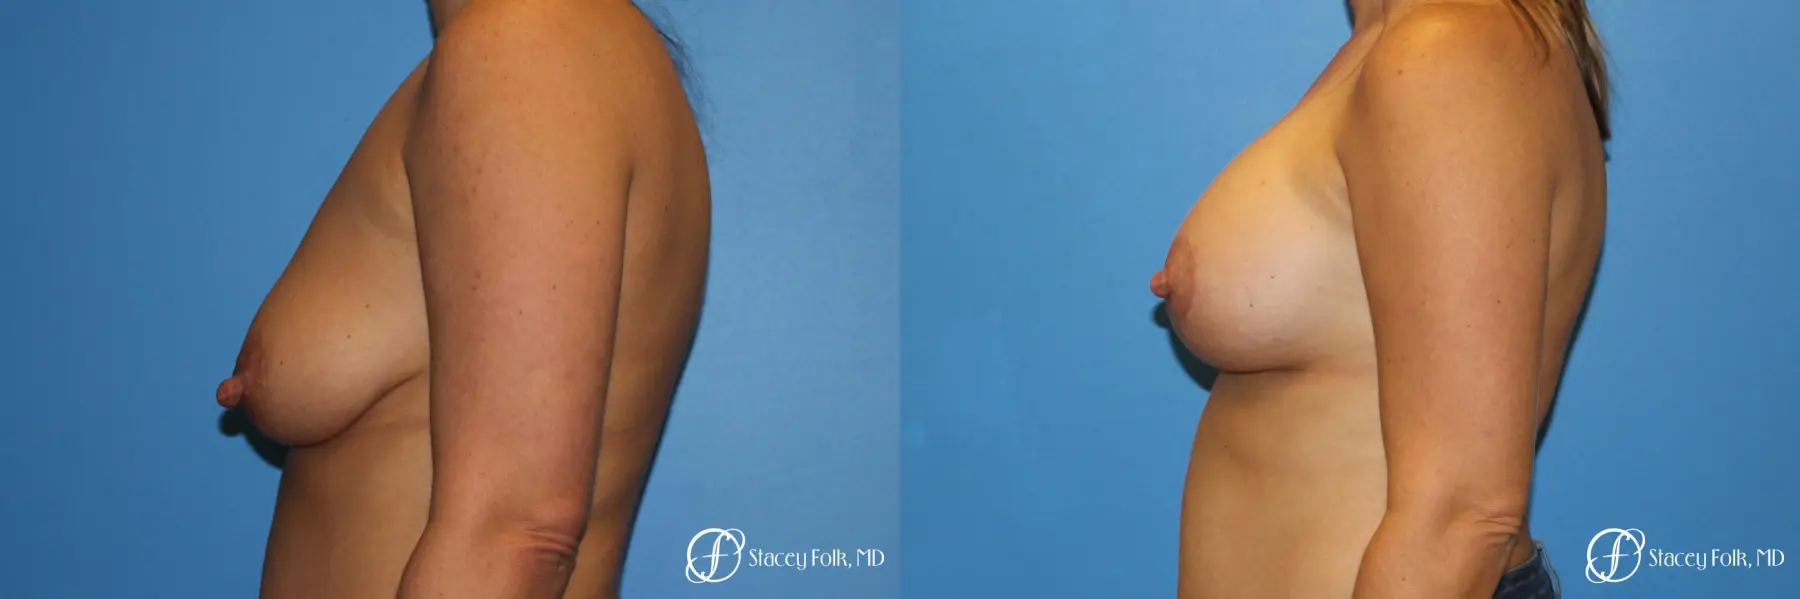 Denver Breast Lift and Augmentation 8629 - Before and After 3